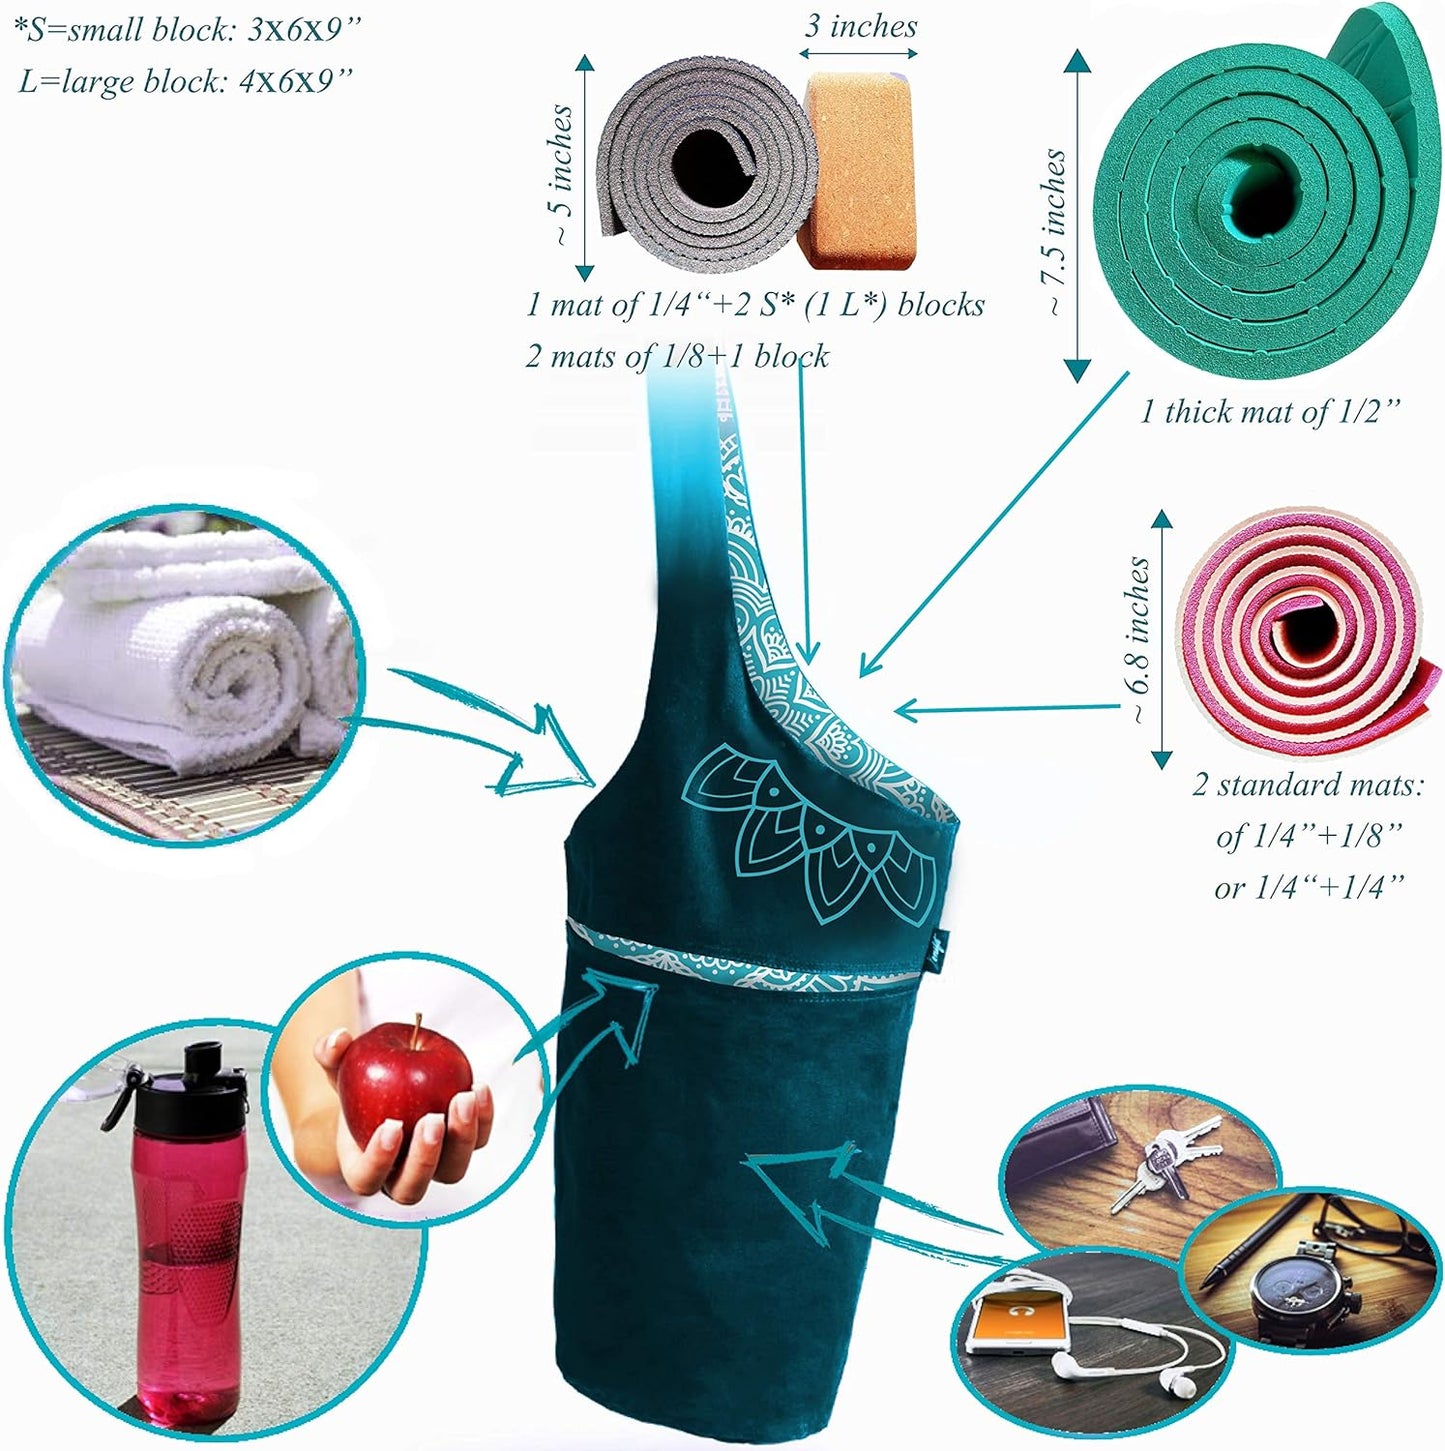 Yoga Mat Bag, Long Tote with Pockets for your Yoga Accessories